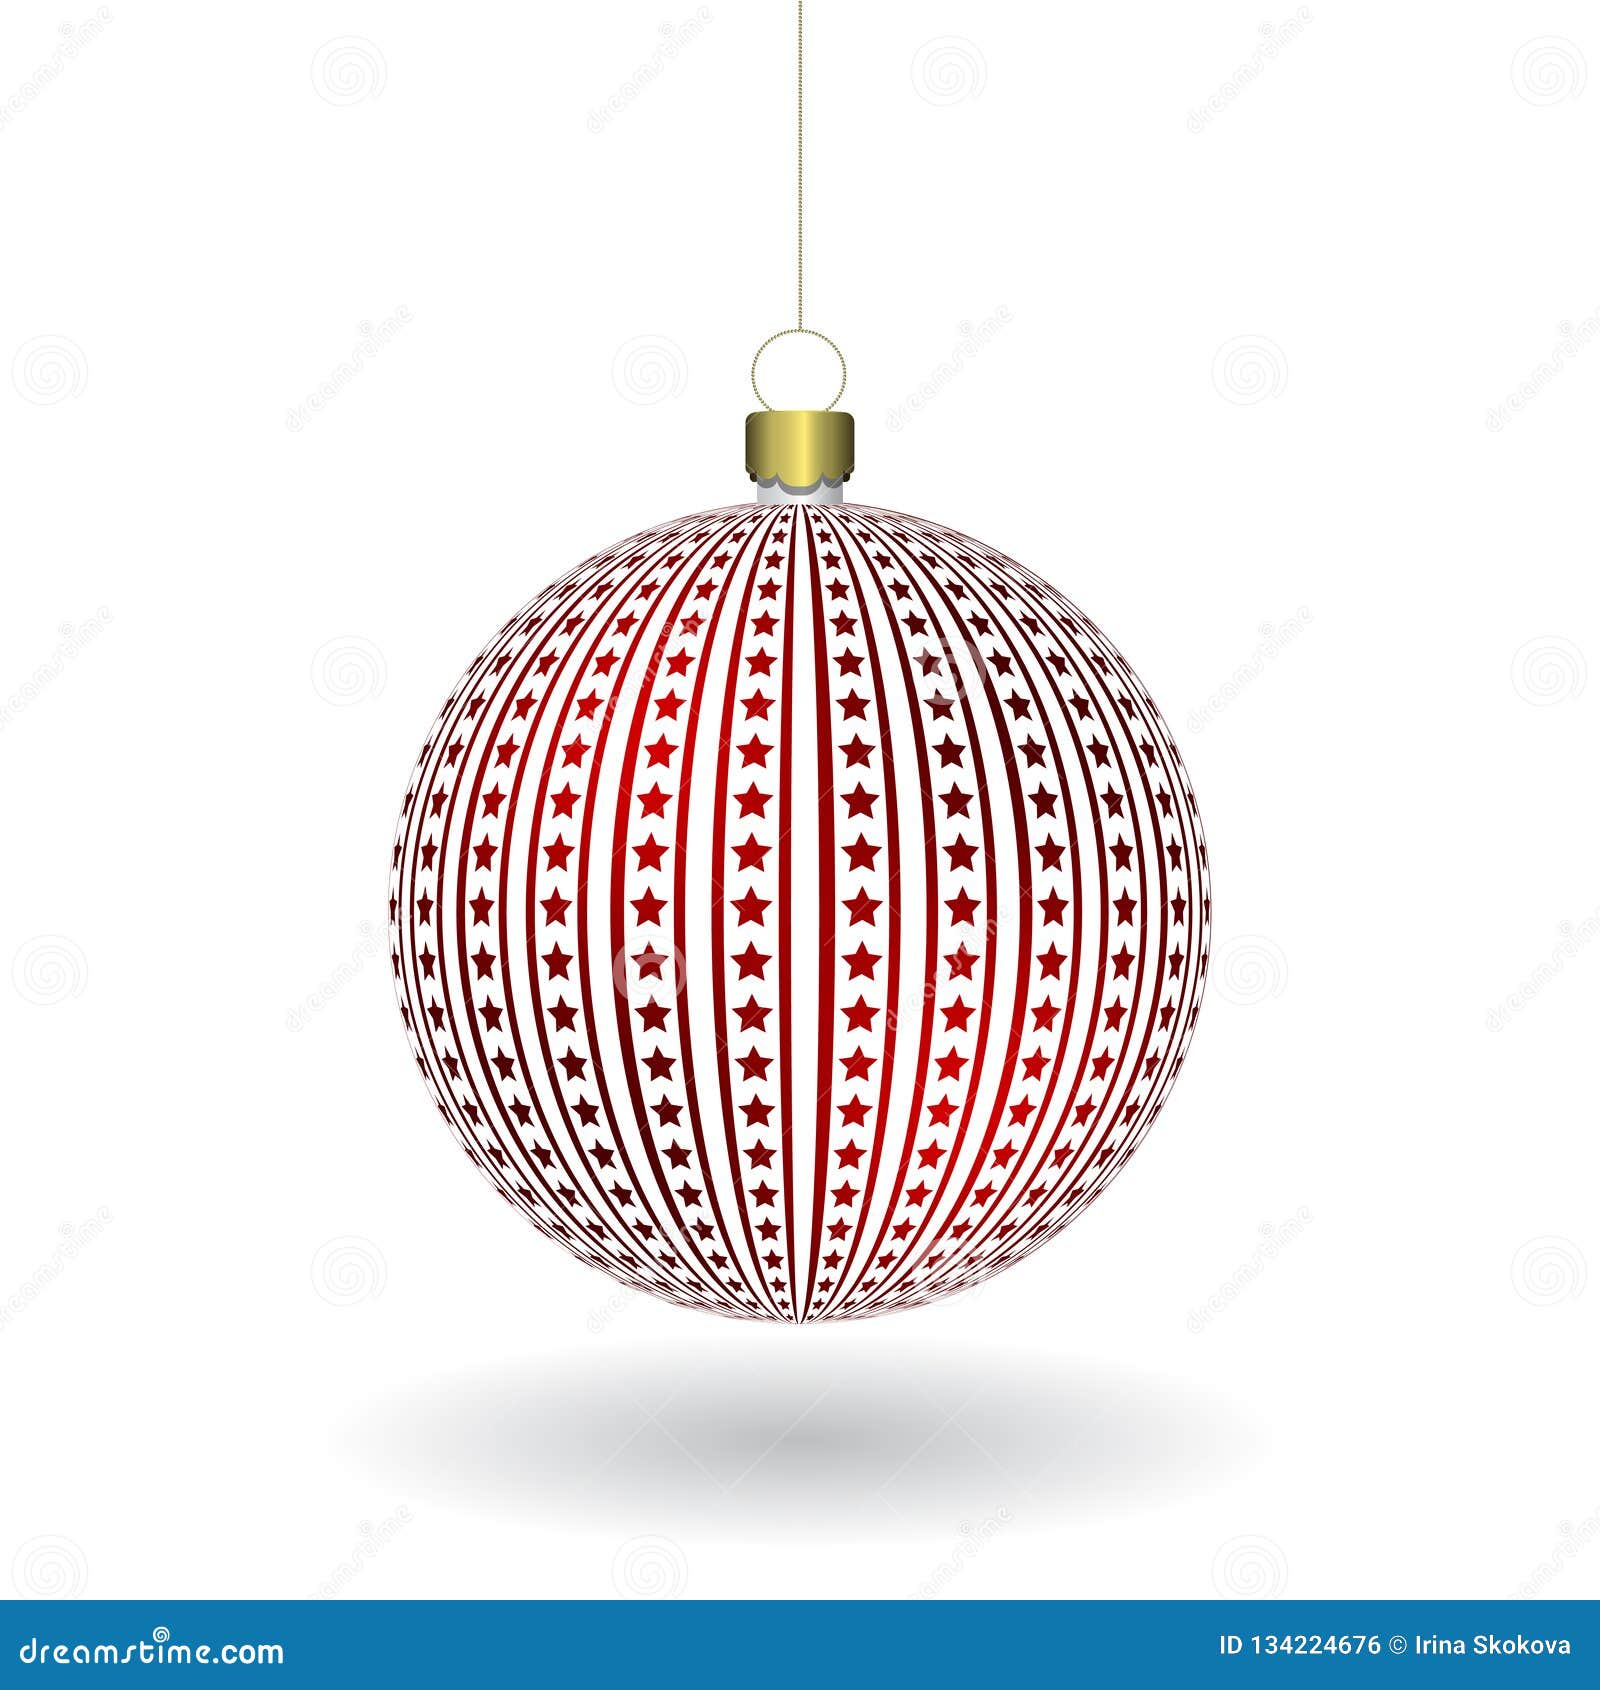 red christmass ball hanging on a golden chain